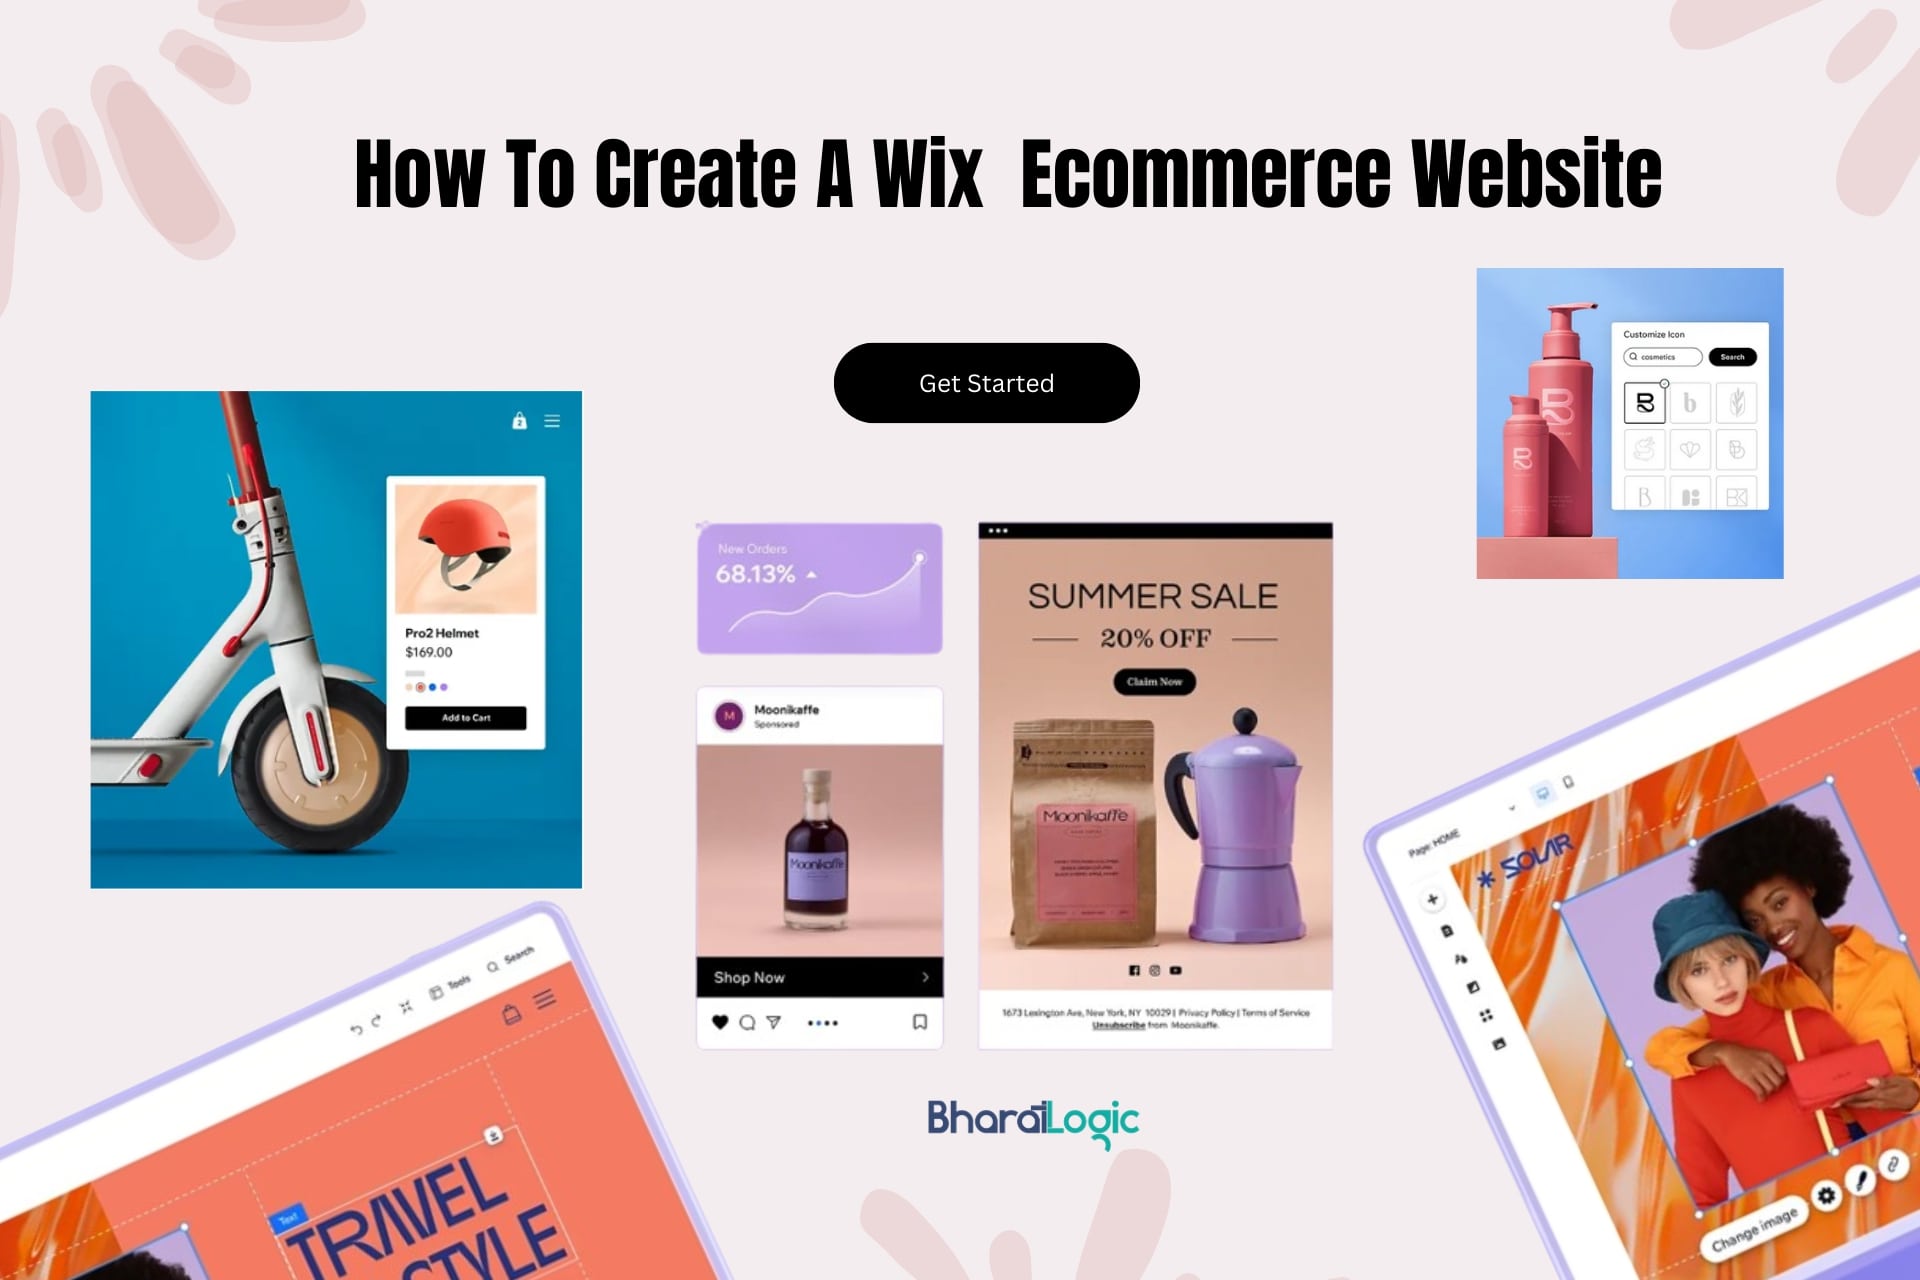 How-To-Create-A-Wix-Ecommerce-Website